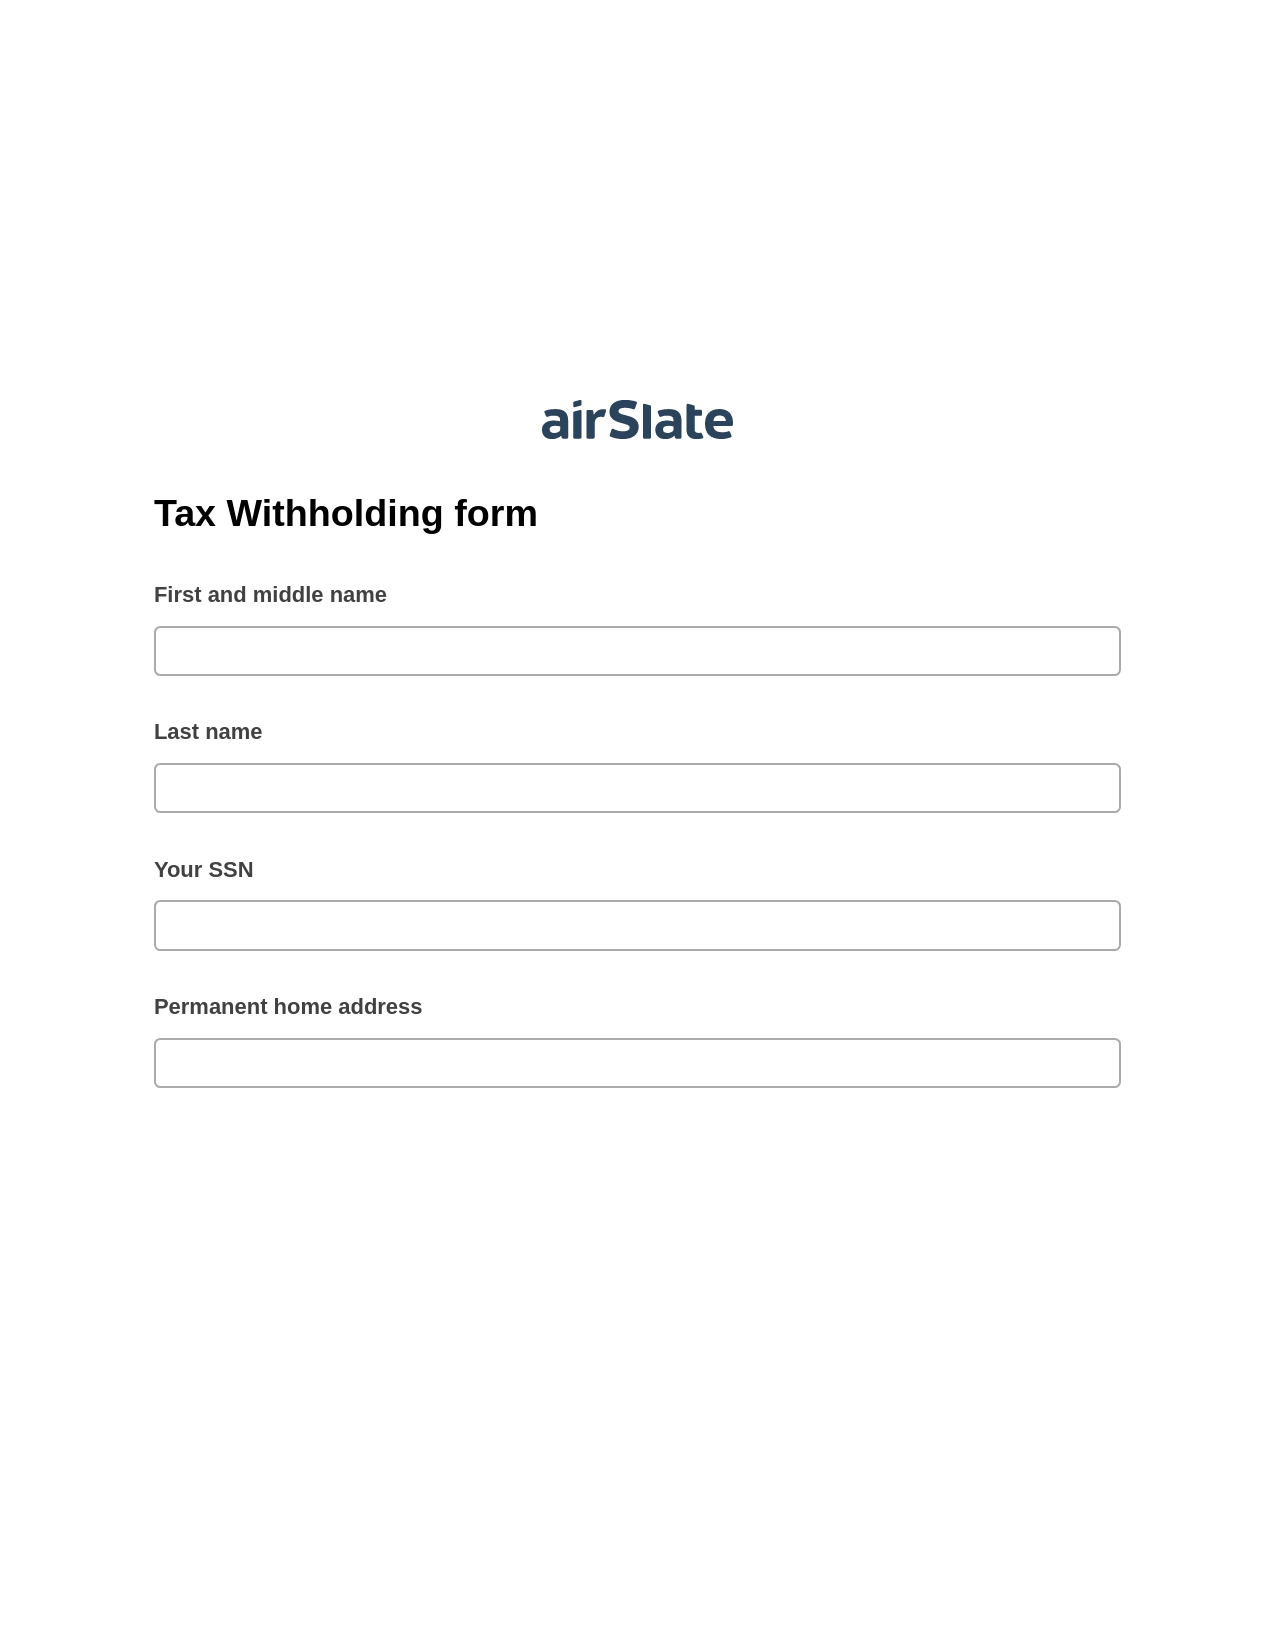 Multirole Tax Withholding form Pre-fill Slate from MS Dynamics 365 Records Bot, SendGrid Send Campaign Bot, Text Message Notification Postfinish Bot